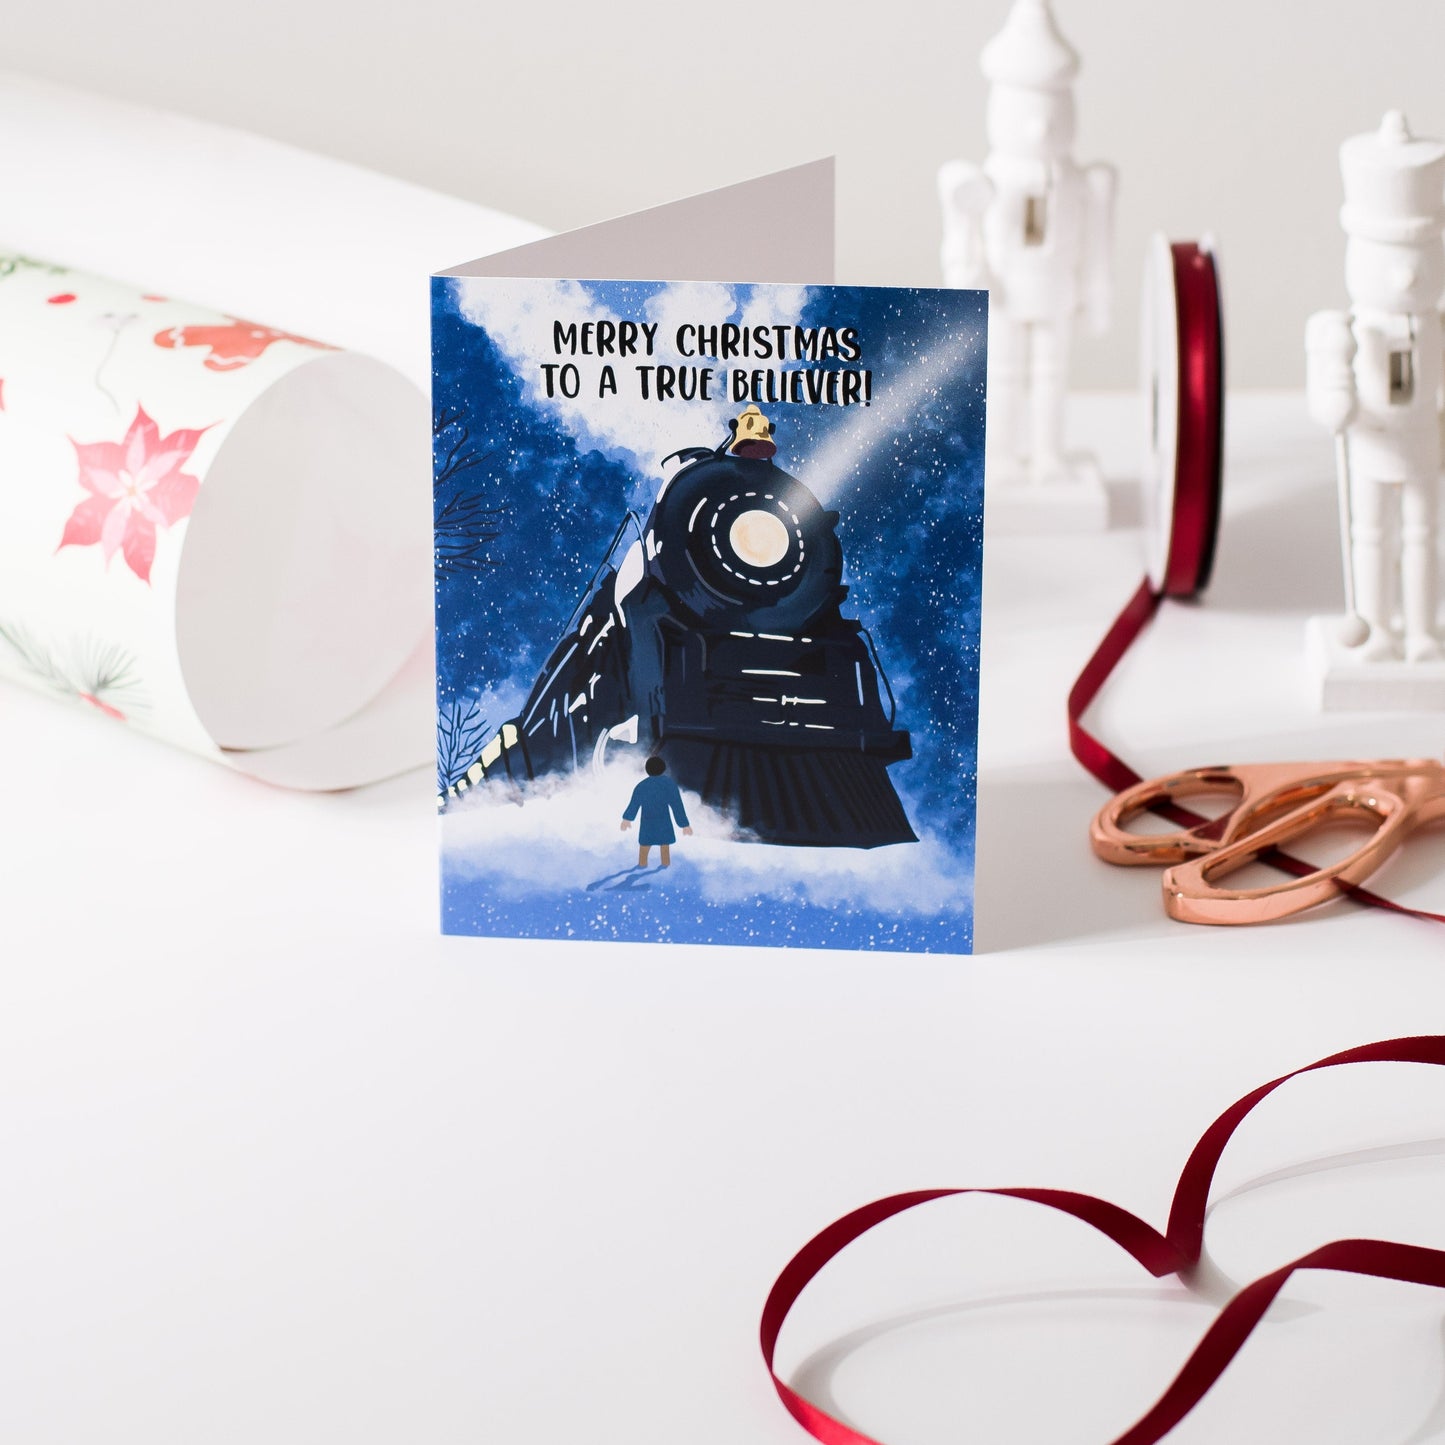 Merry Christmas To A True Believer! - Greeting Card